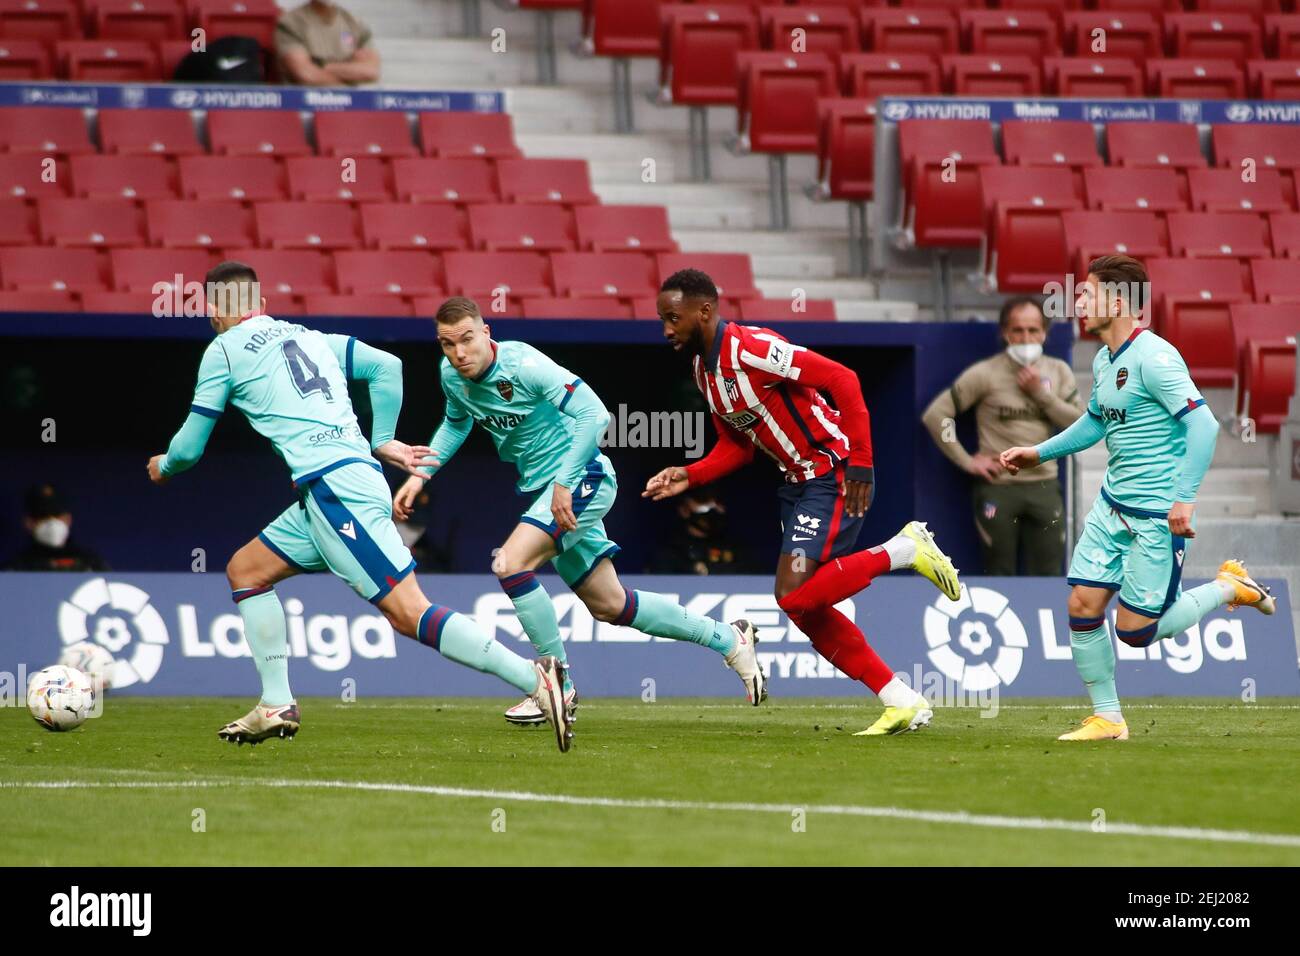 Moussa Dembele of Atletico de Madrid in action during the Spanish championship La Liga football match between Atletico de Madri / LM Stock Photo